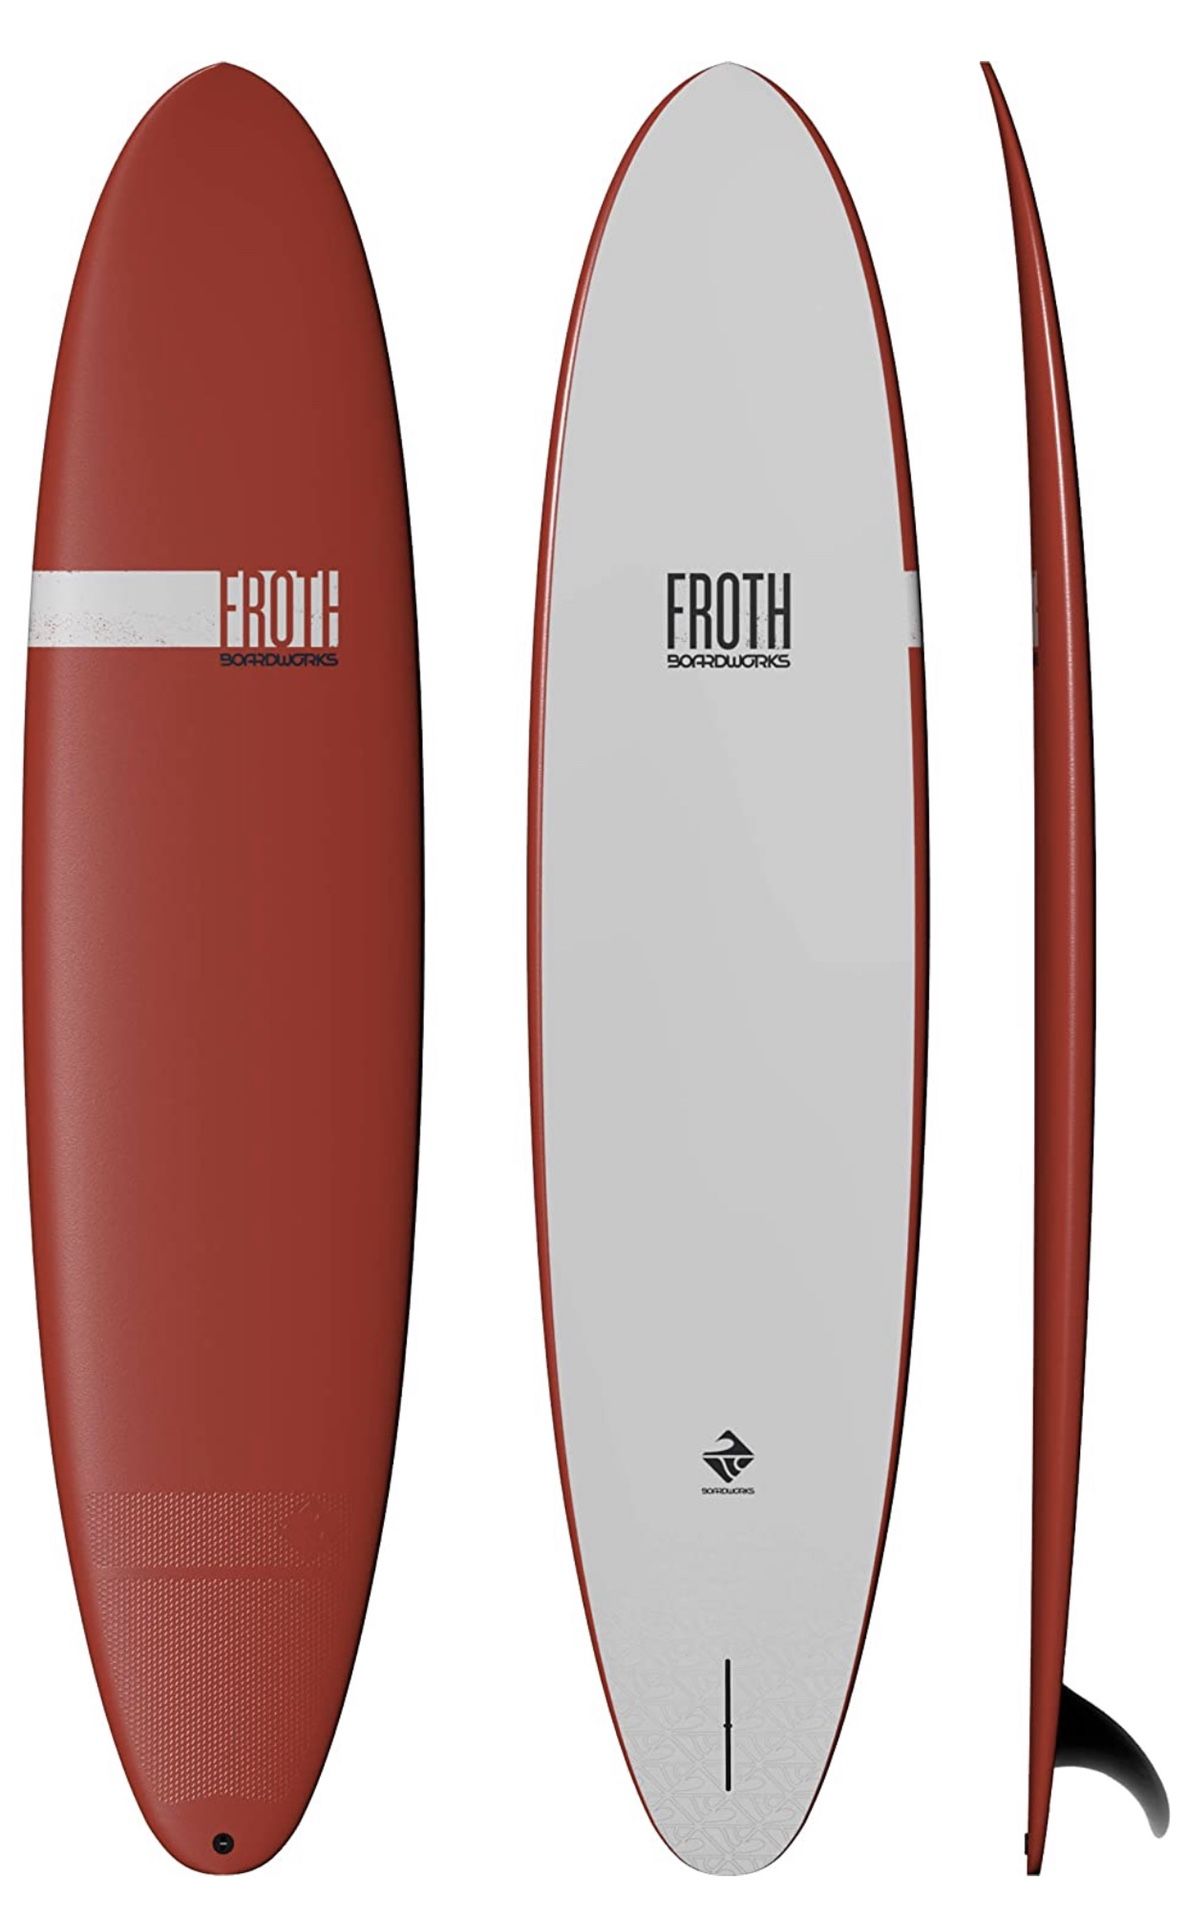 Boardworks Froth! Soft Top Surfboard | Wake Surf Surfboard 9' Length